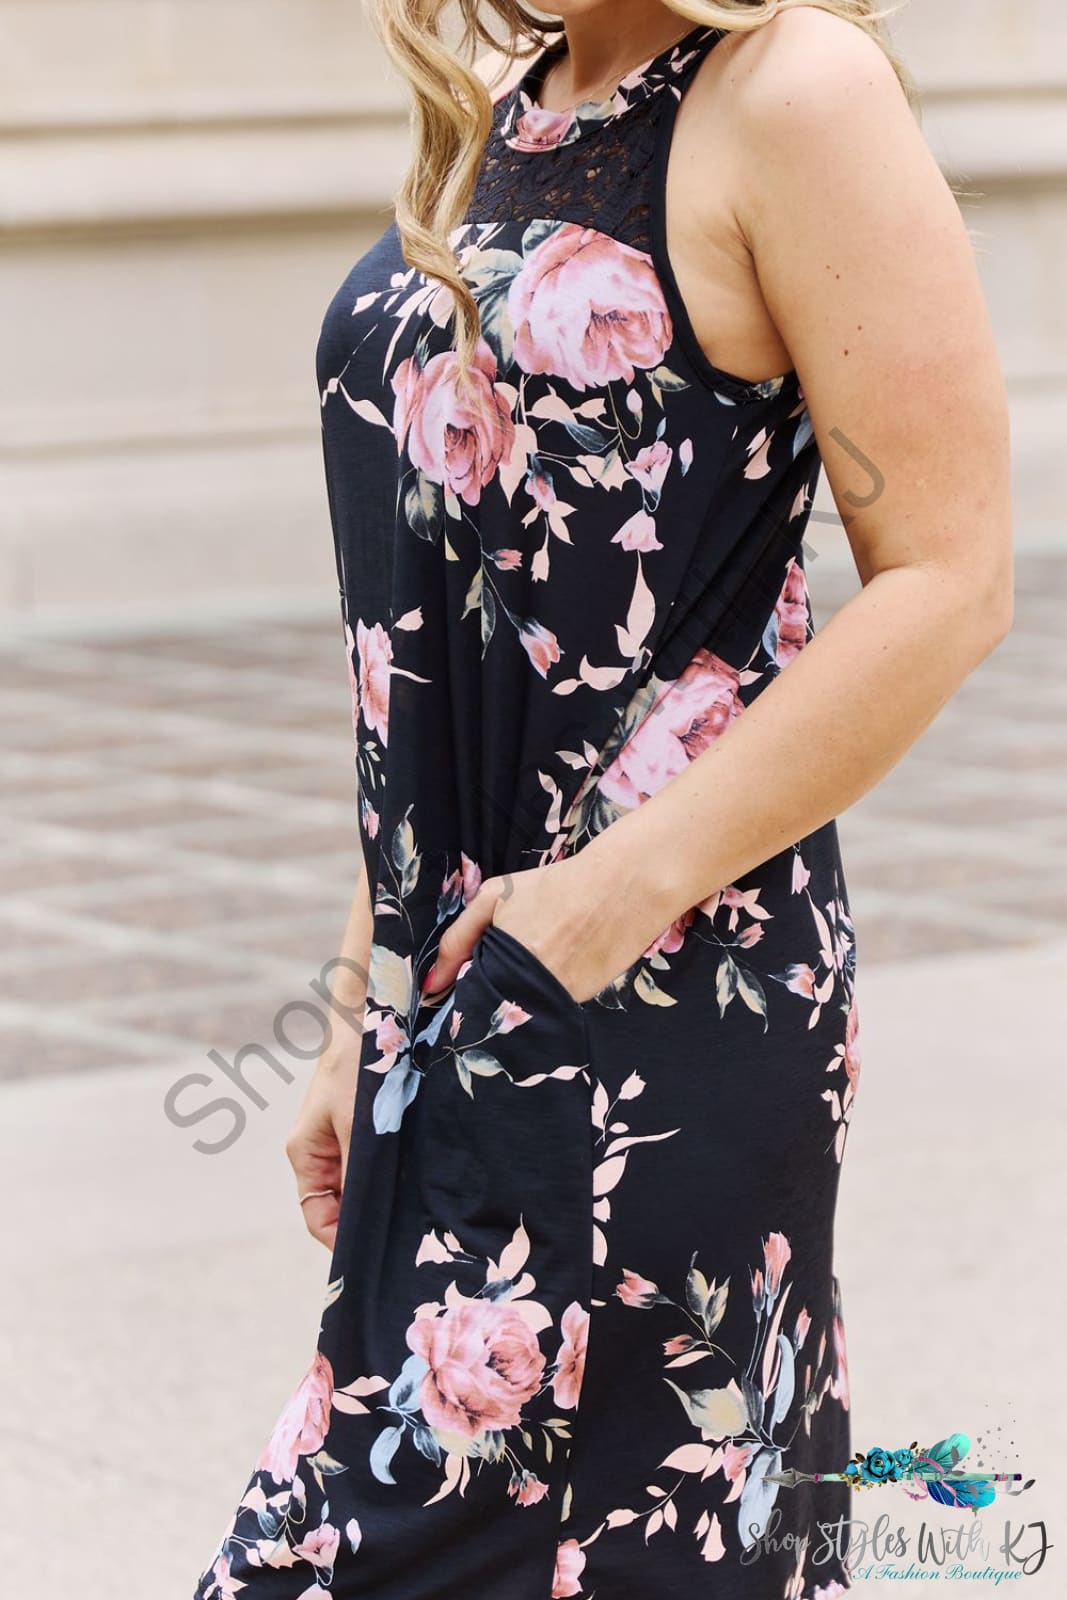 On A Journey Floral Lace Detail Sleeveless Dress Dresses